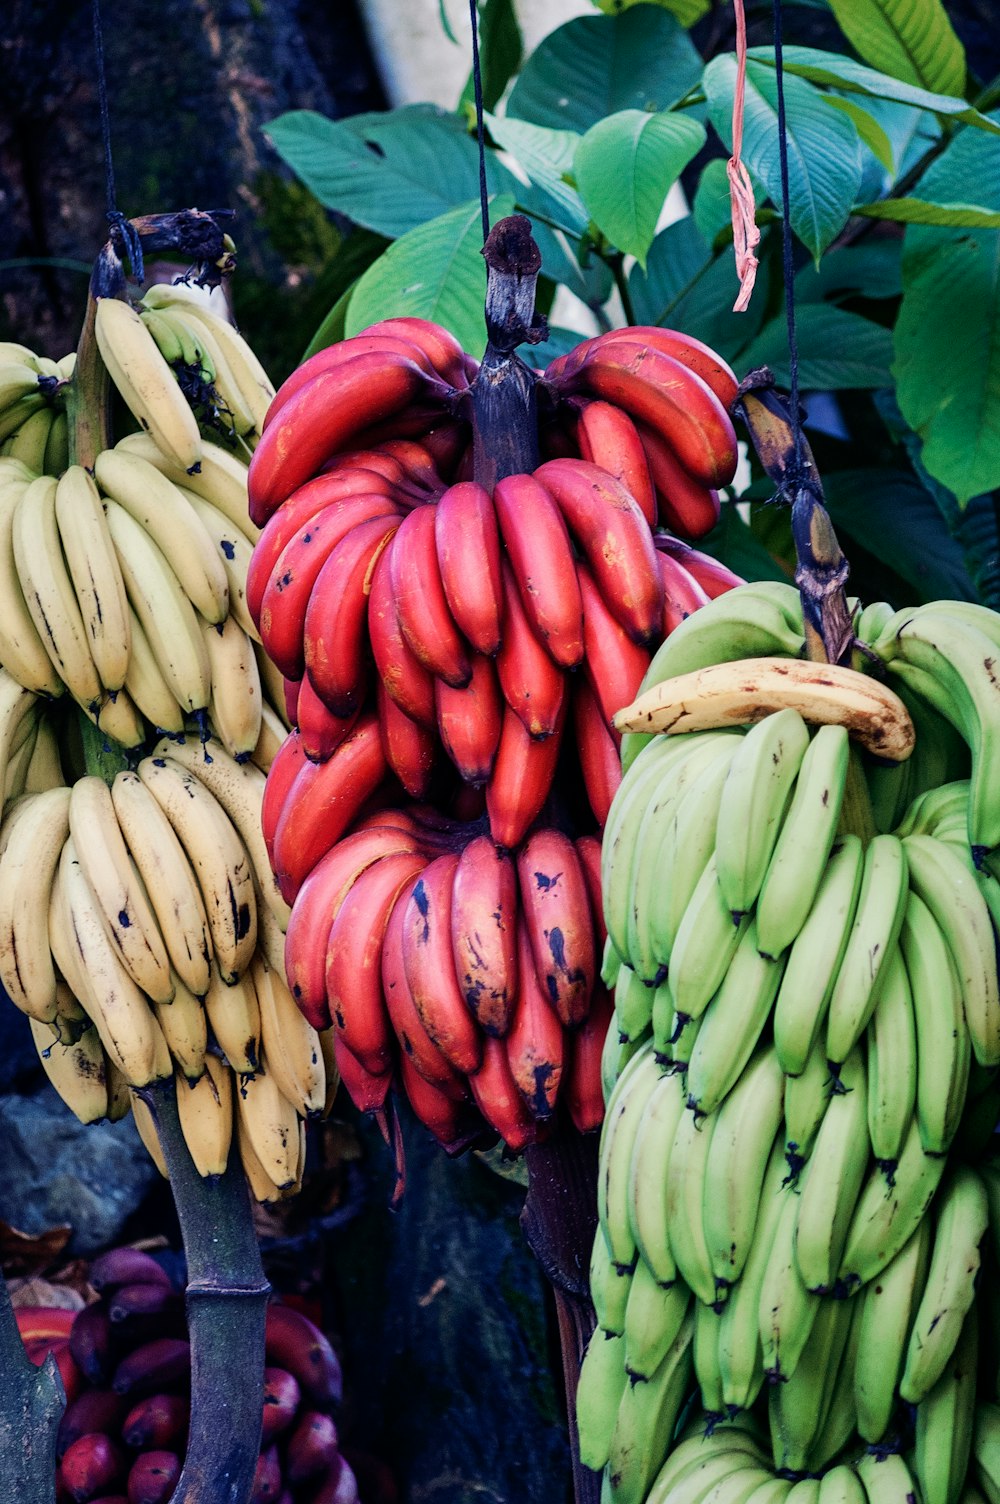 yellow, green, and red bananas hanging on tree